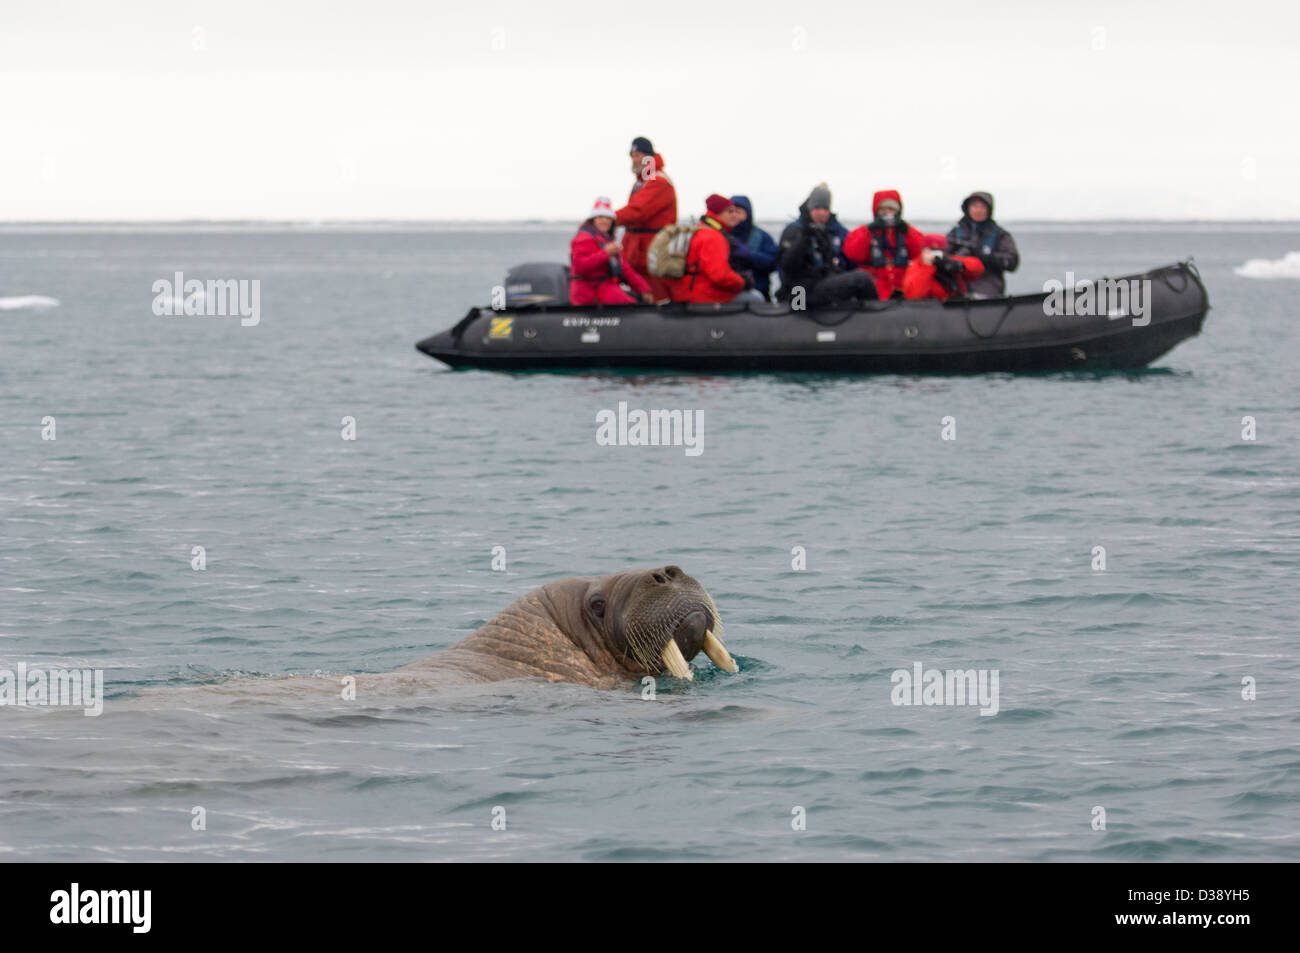 Walrus (Odobenus rosmarus) swimming in the sea at Kapp Lee, with a zodiac inflatable boat of tourists behind, Edgeøya Island, Svalbard Archipelago, Norway Stock Photo